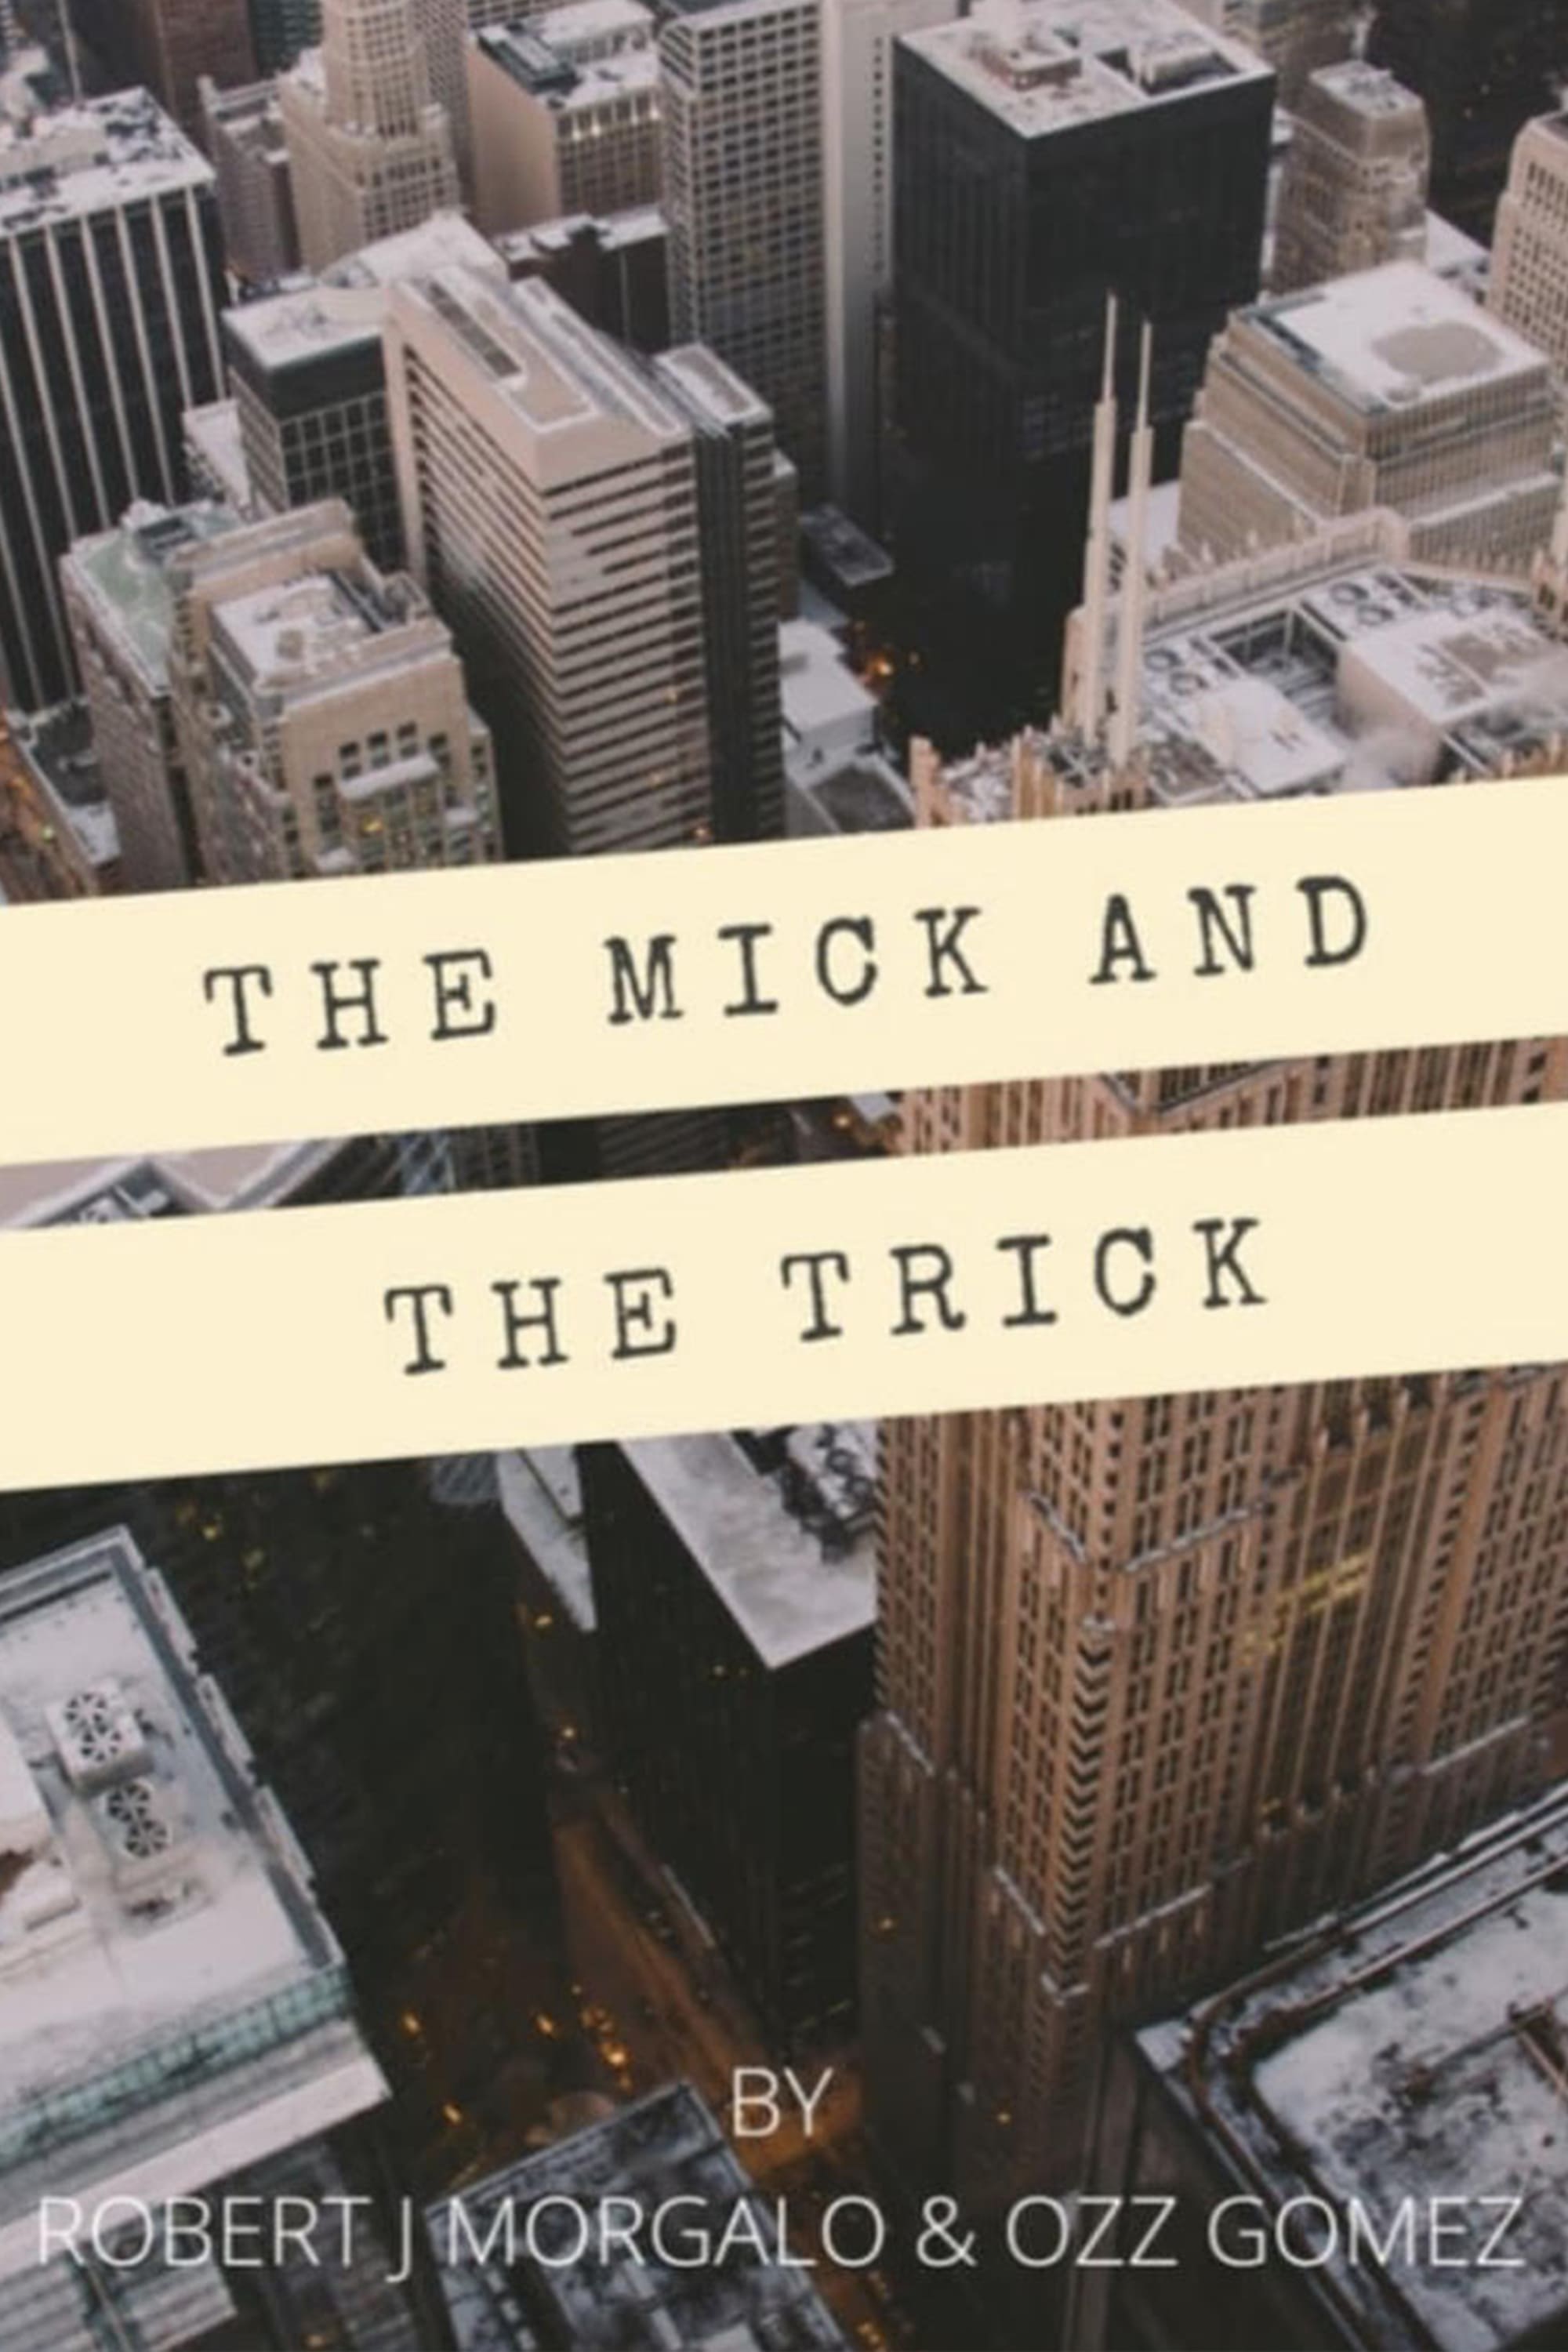 The Mick and the Trick